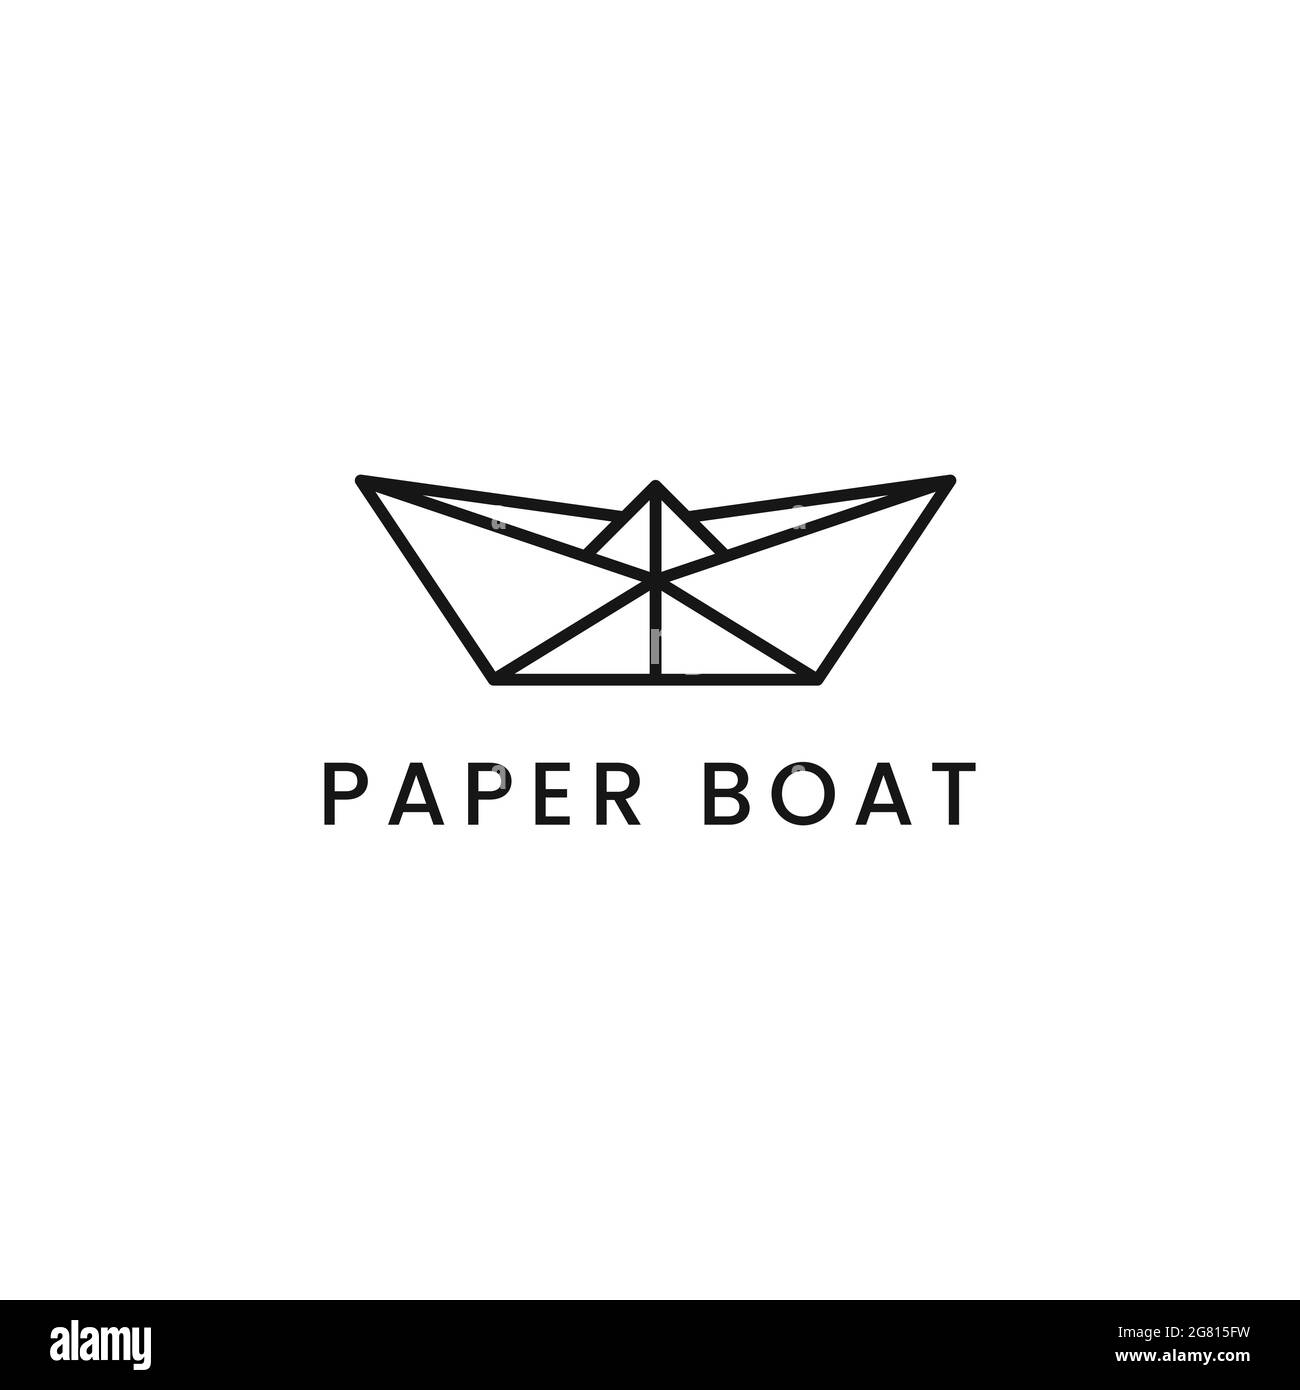 Paper boat line art minimalistic logo symbol vector illustration design, perfect for various business identities Stock Vector